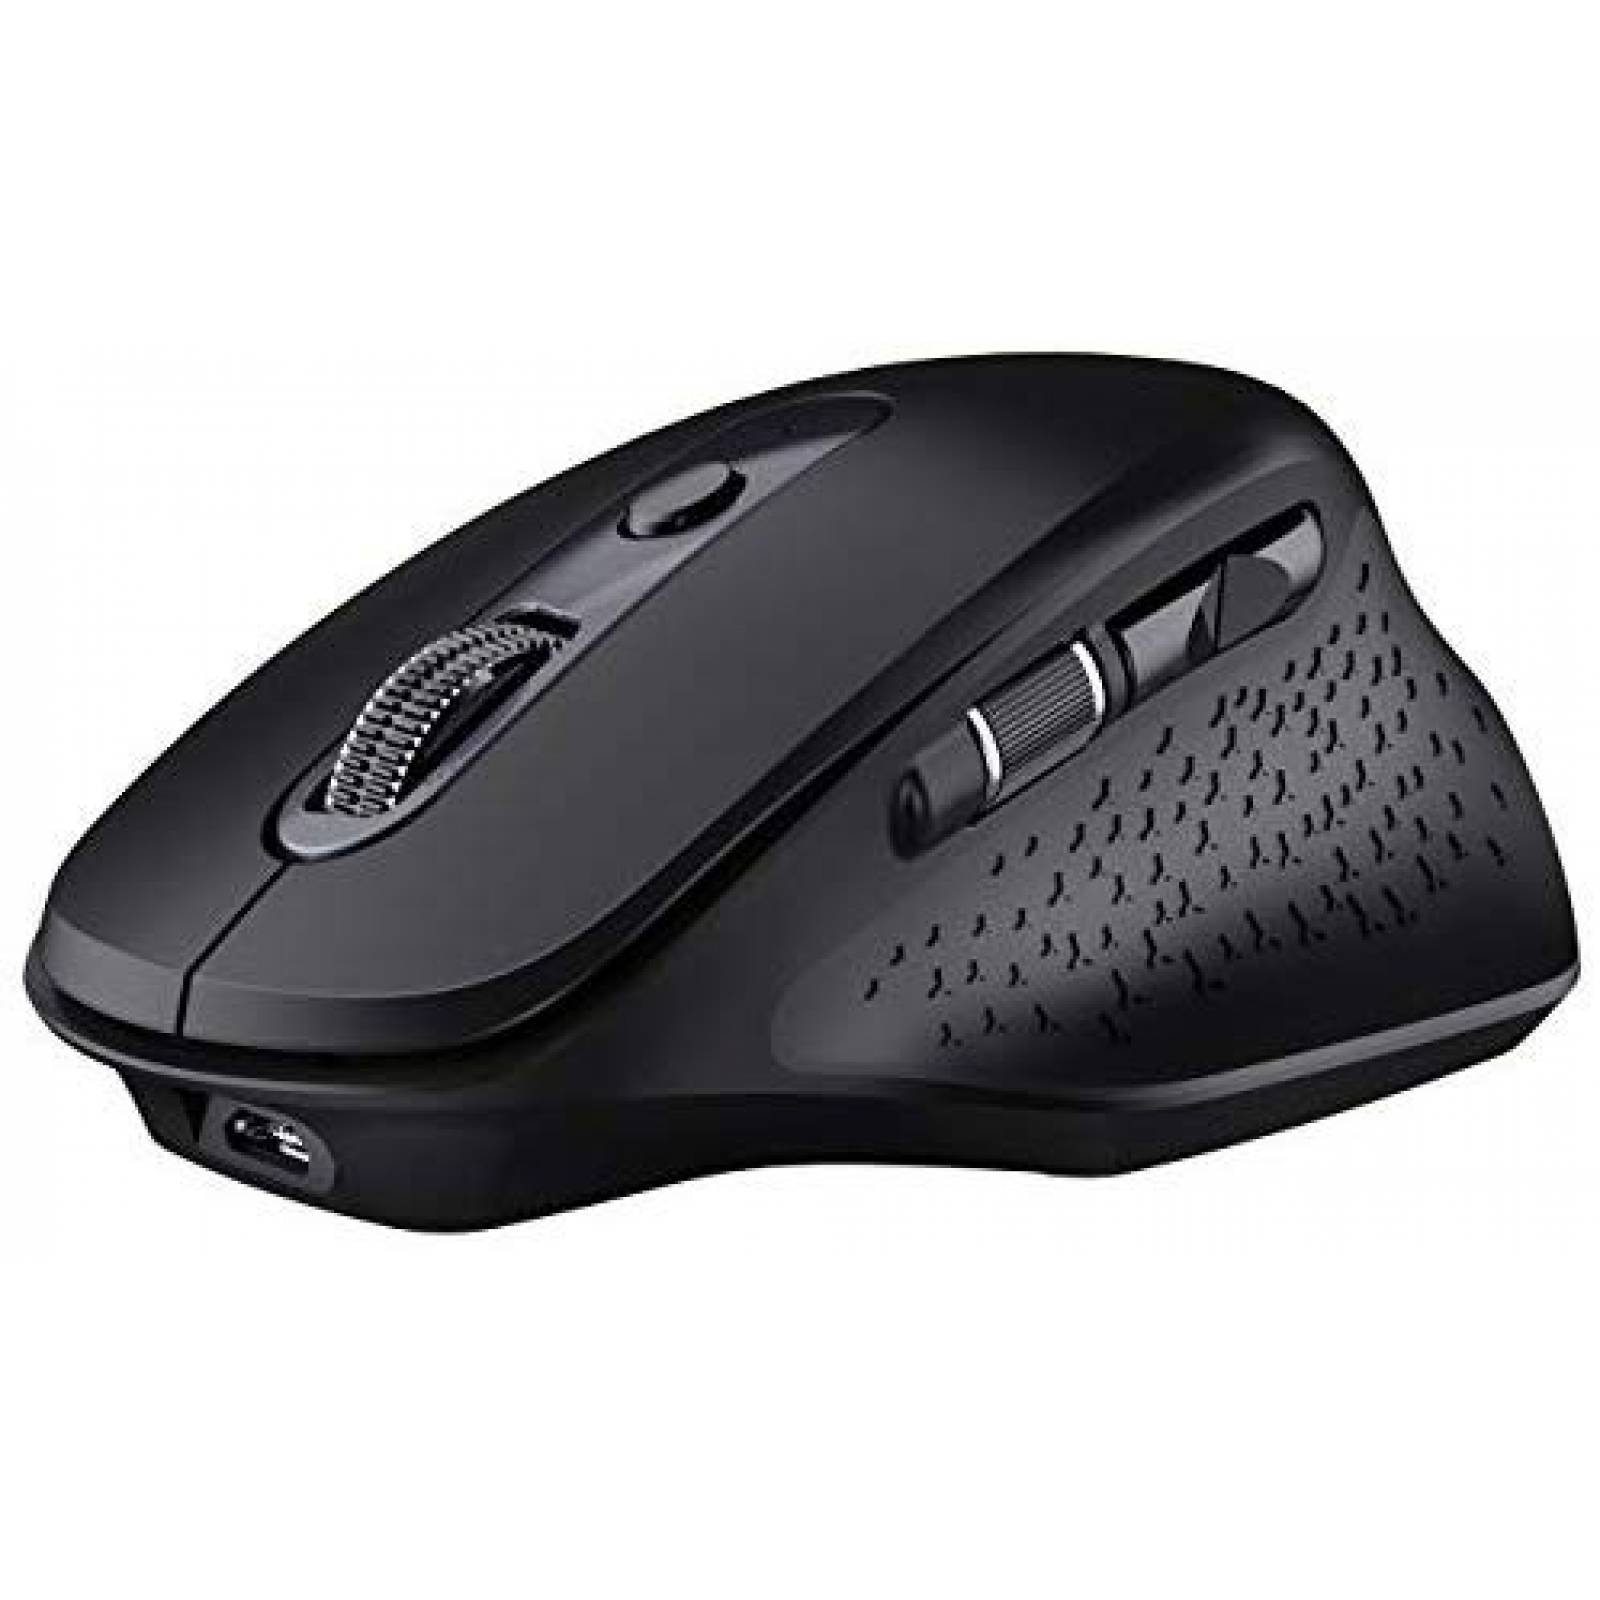 Mouse inalámbrico VicTsing Pioneer gamer bluetooth -Negro